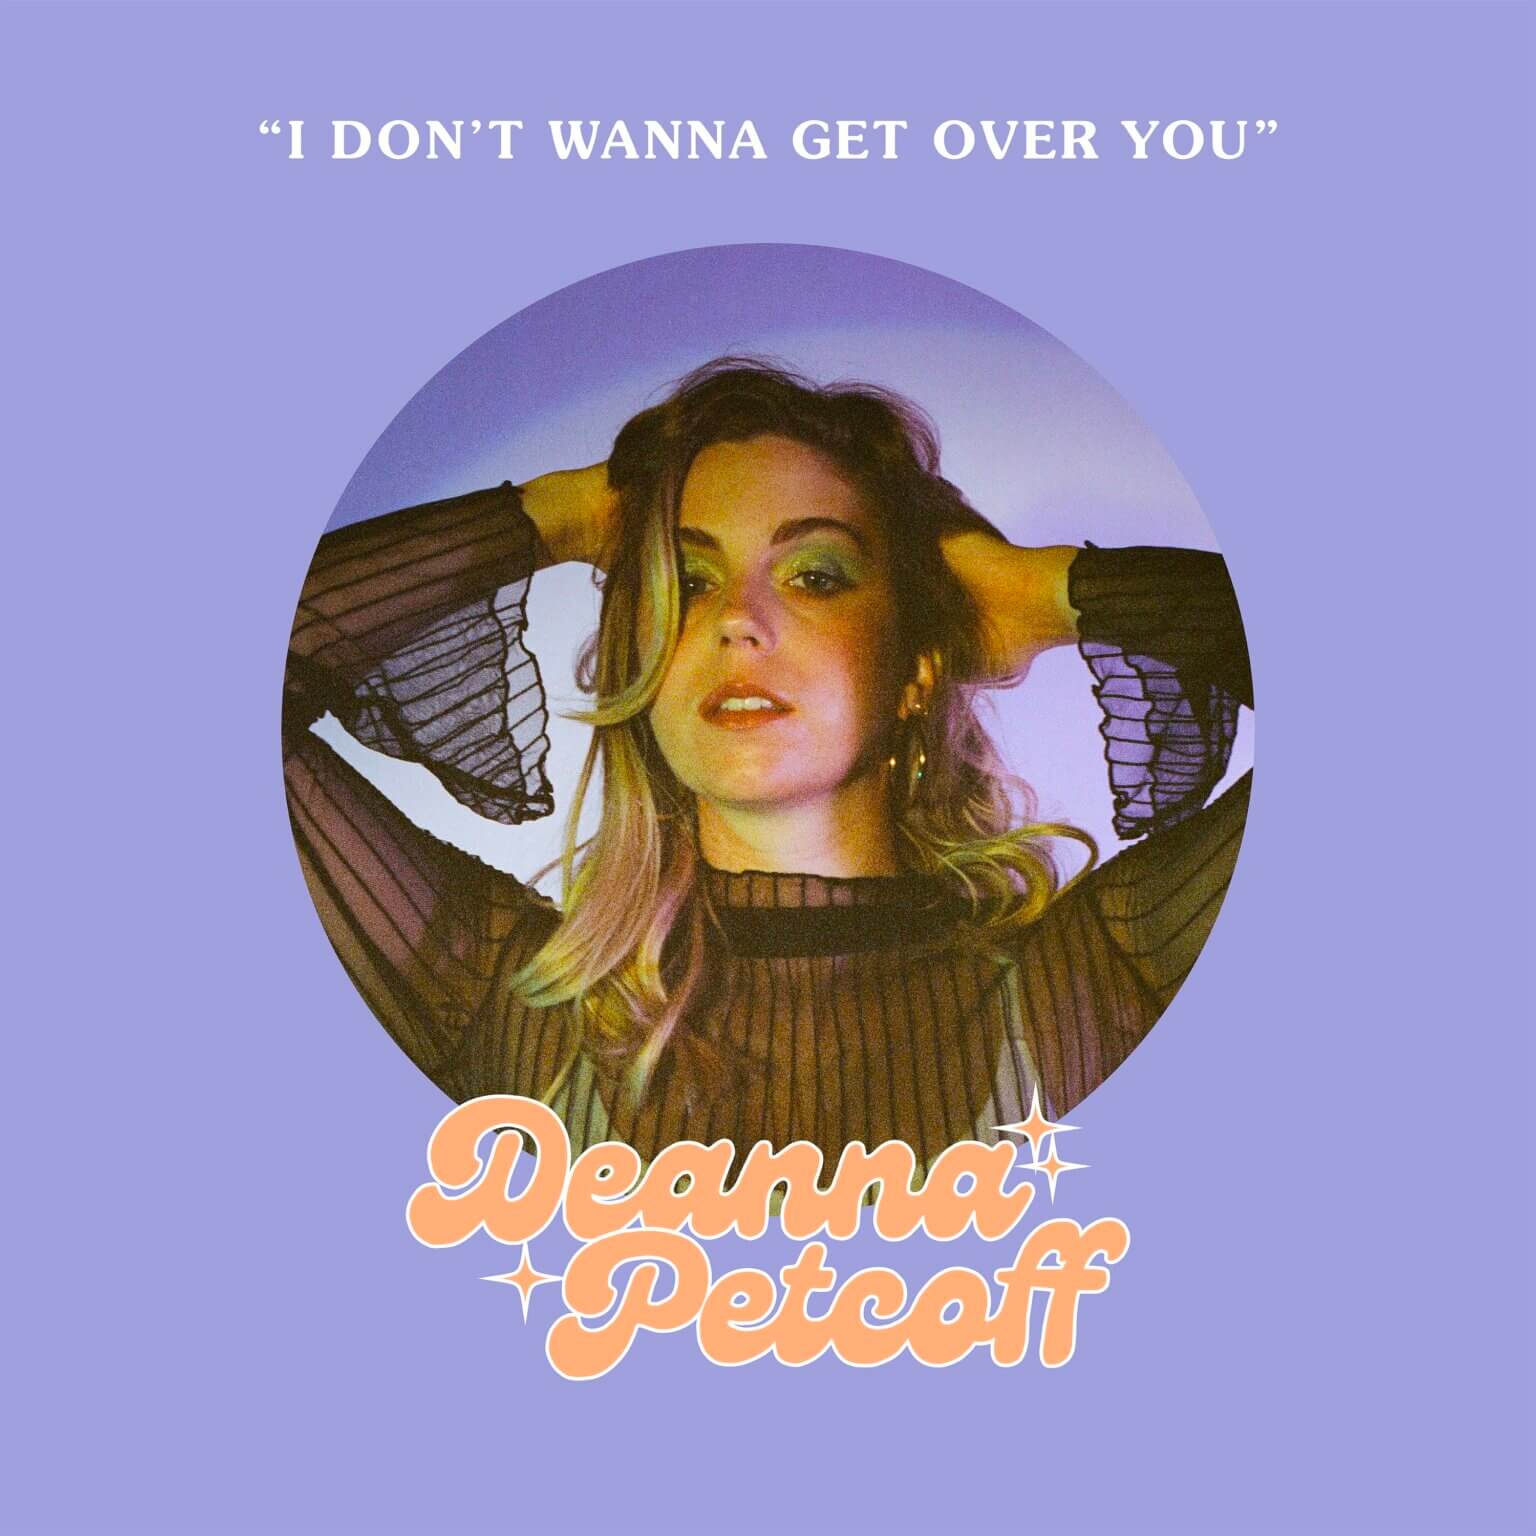 "I Don't Wanna Get Over You" by Deanna Petcoff is Northern Transmissions Song of the Day